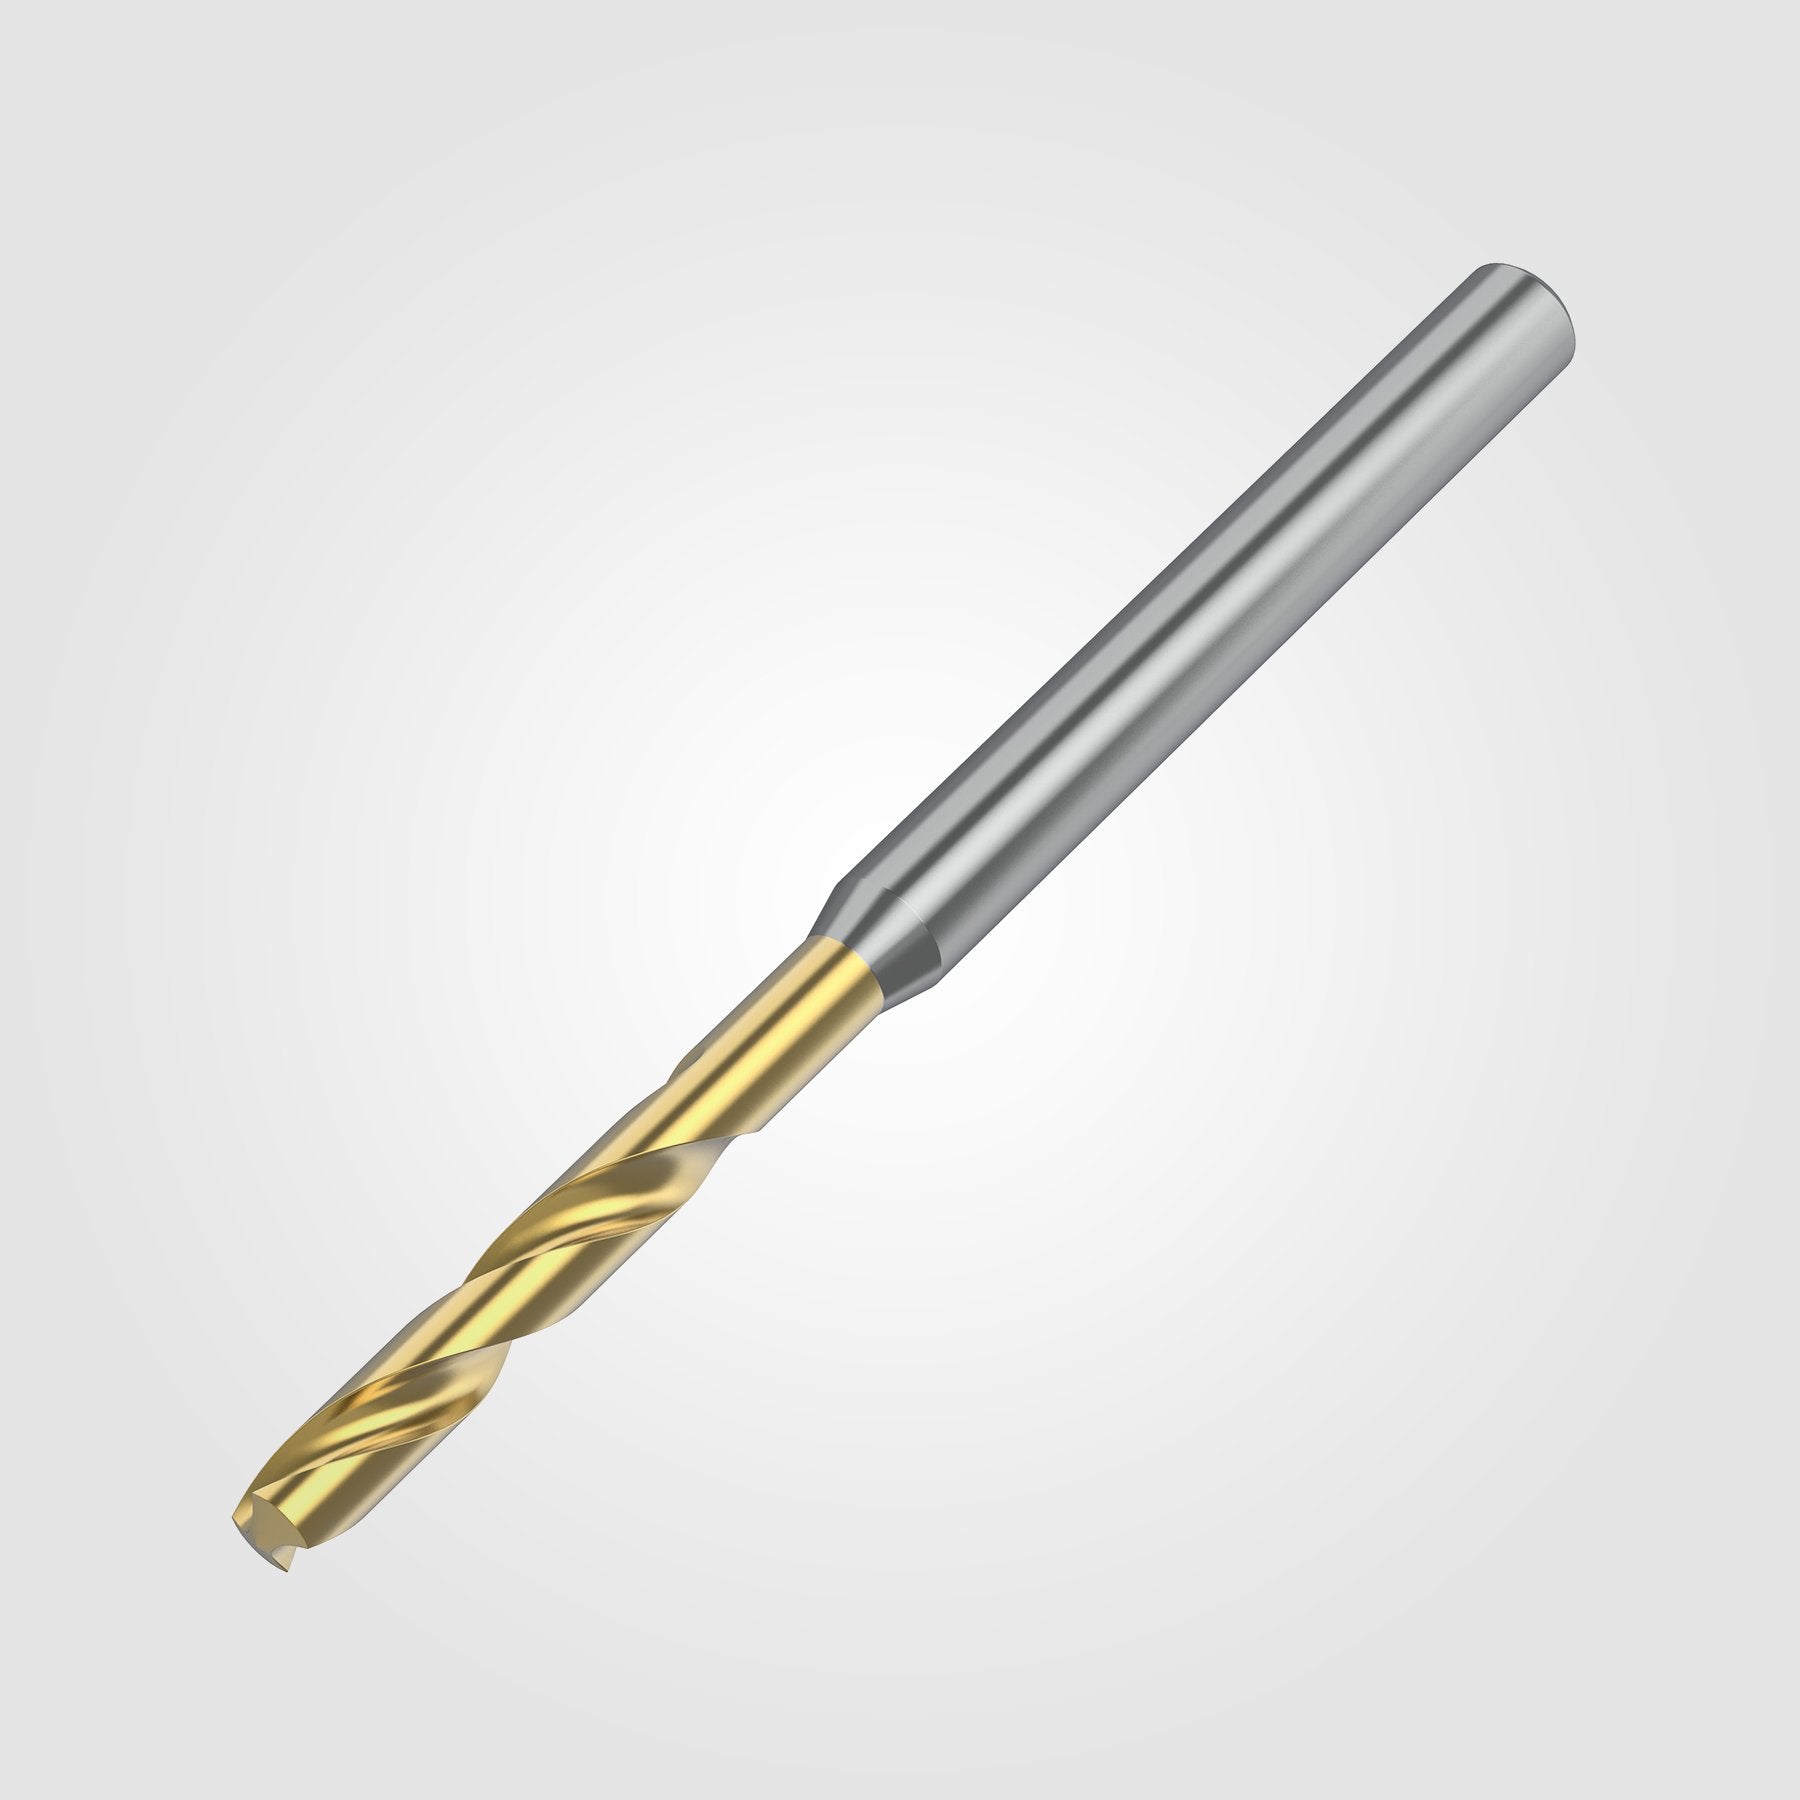 GOdrill (THROUGH COOLANT) | 3mm / .1181" / 3xD | SOLID CARBIDE DRILL | 4151081